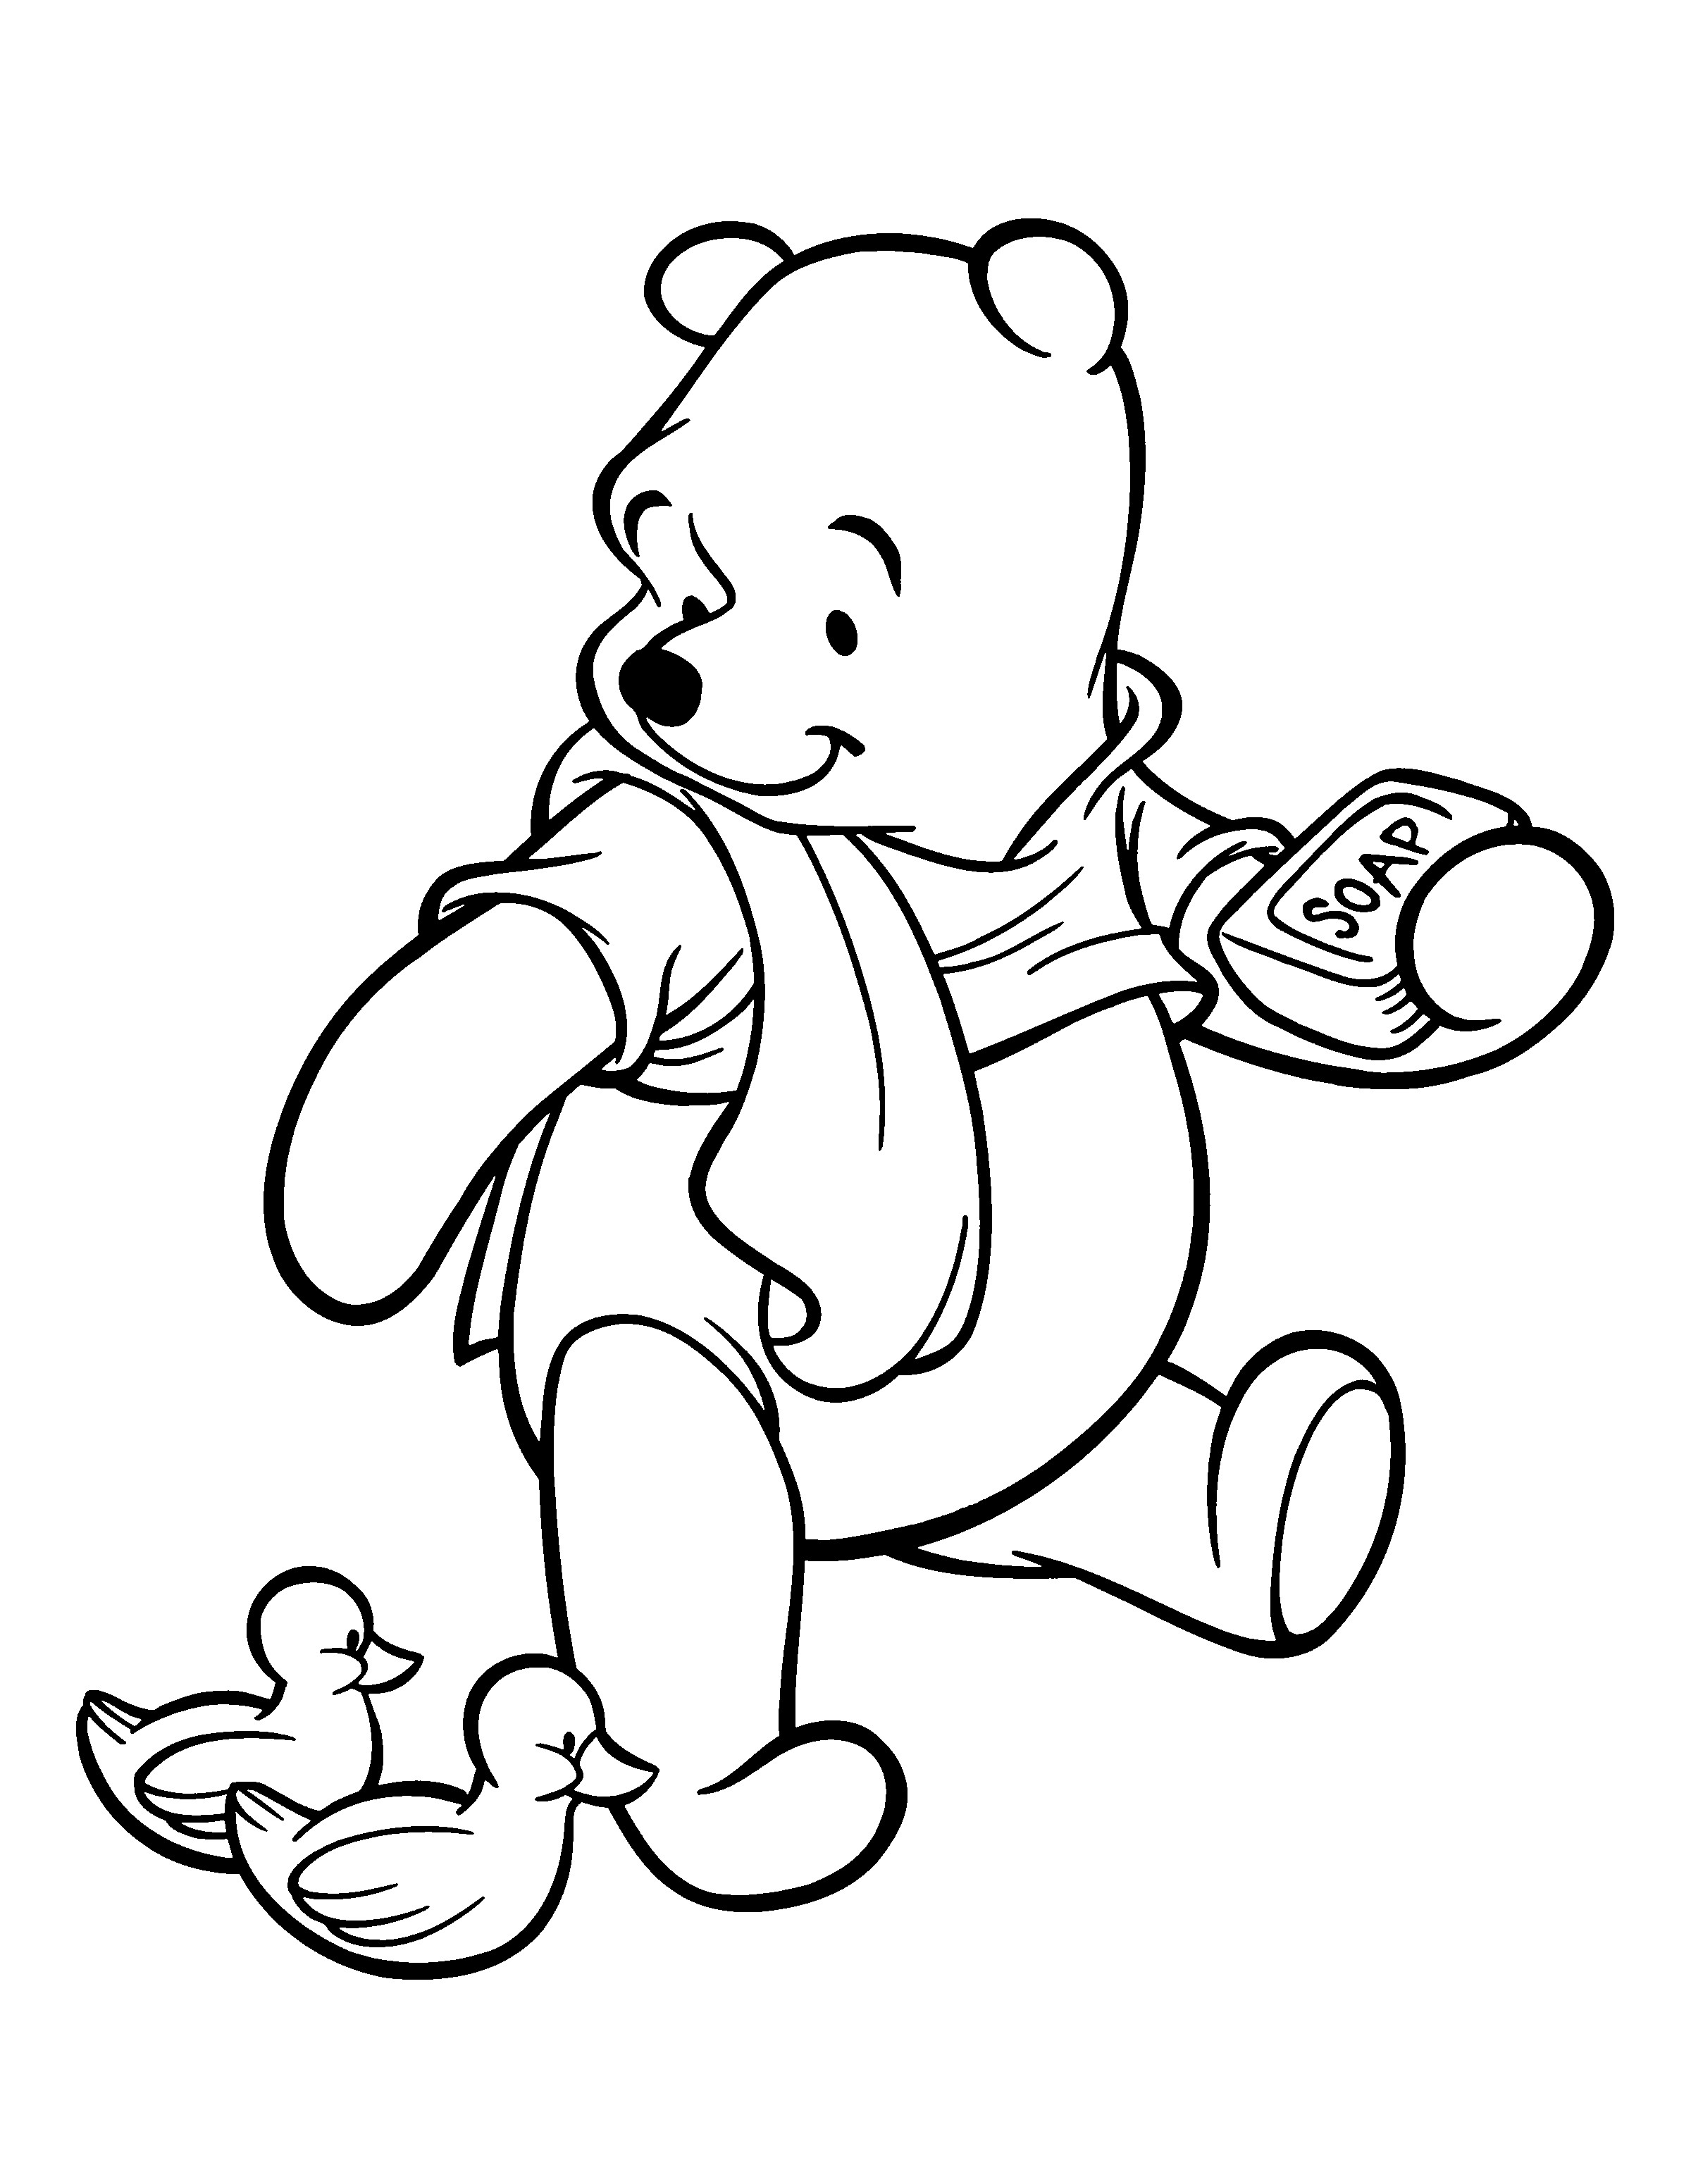 Coloring Book Pages For Winnie The Pooh
 Free Printable Winnie The Pooh Coloring Pages For Kids